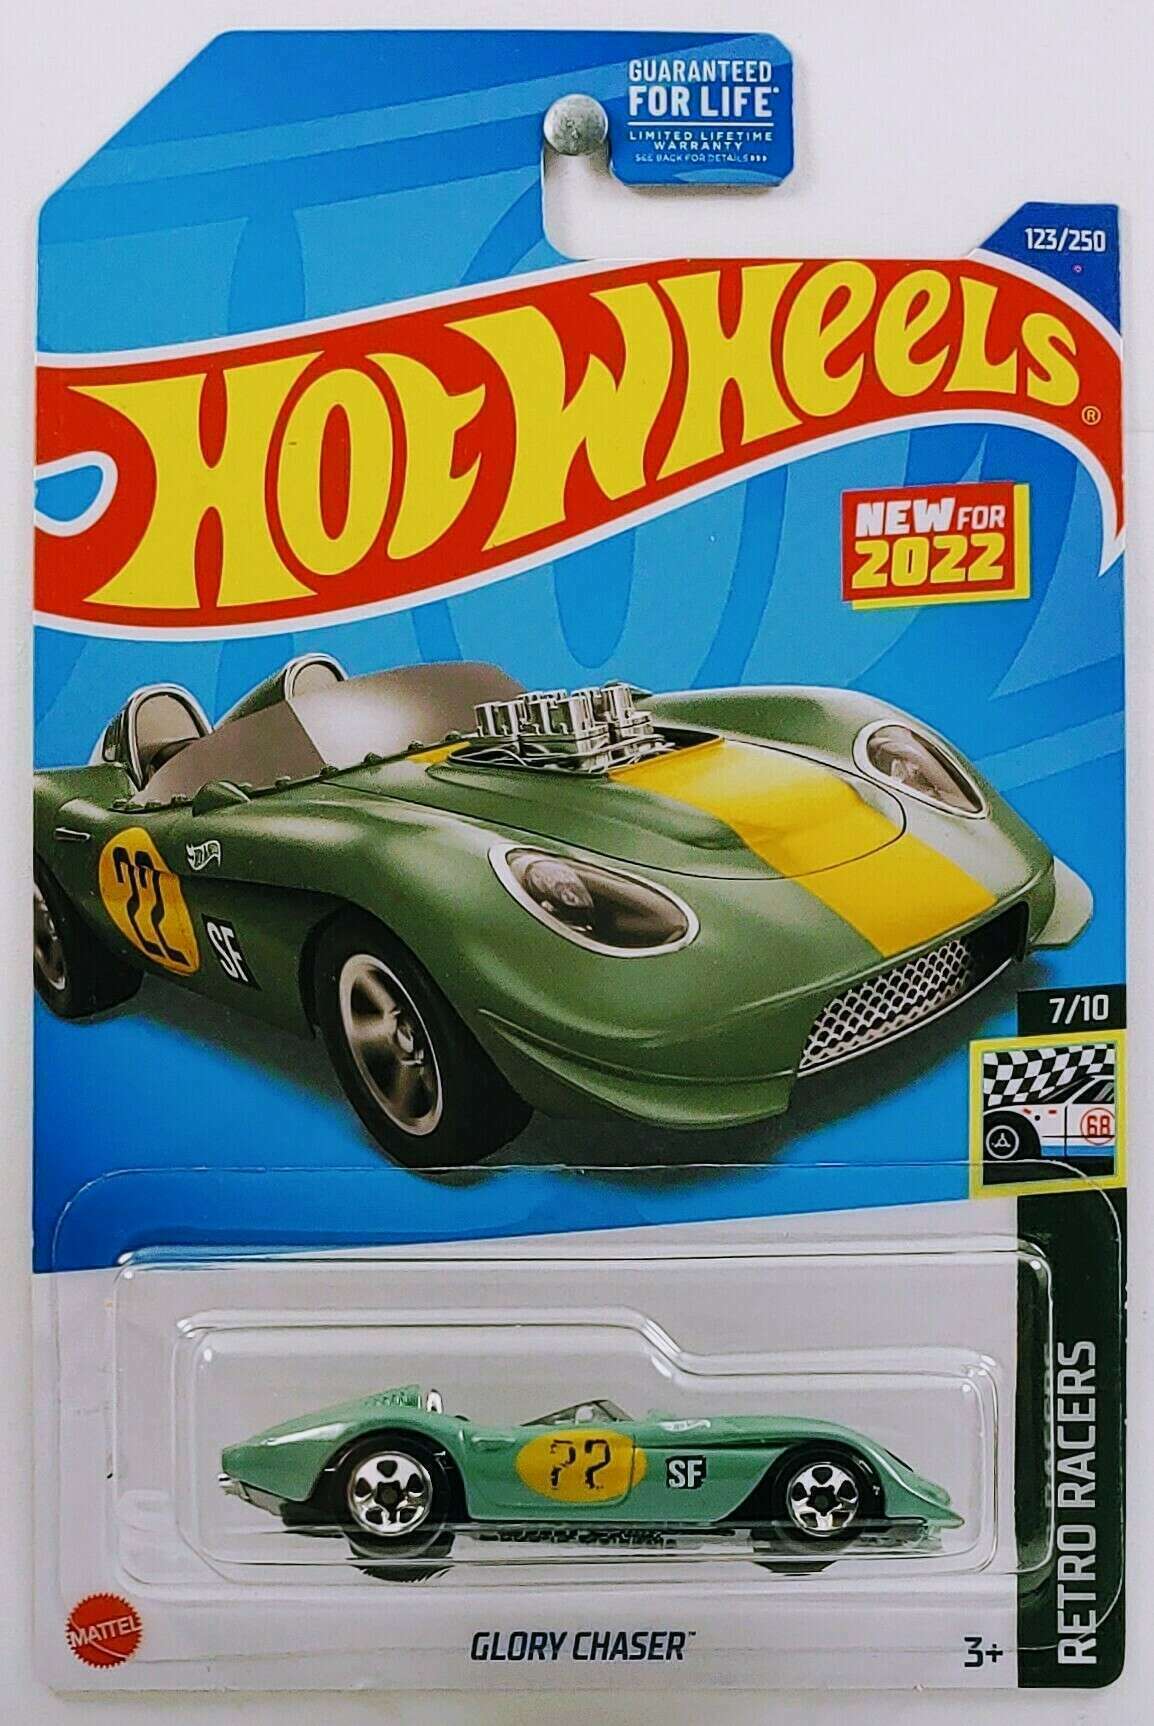 Hot Wheels 2022 - Collector # 123/250 - New Models - Glory Chaser - ERROR # 22 is faded